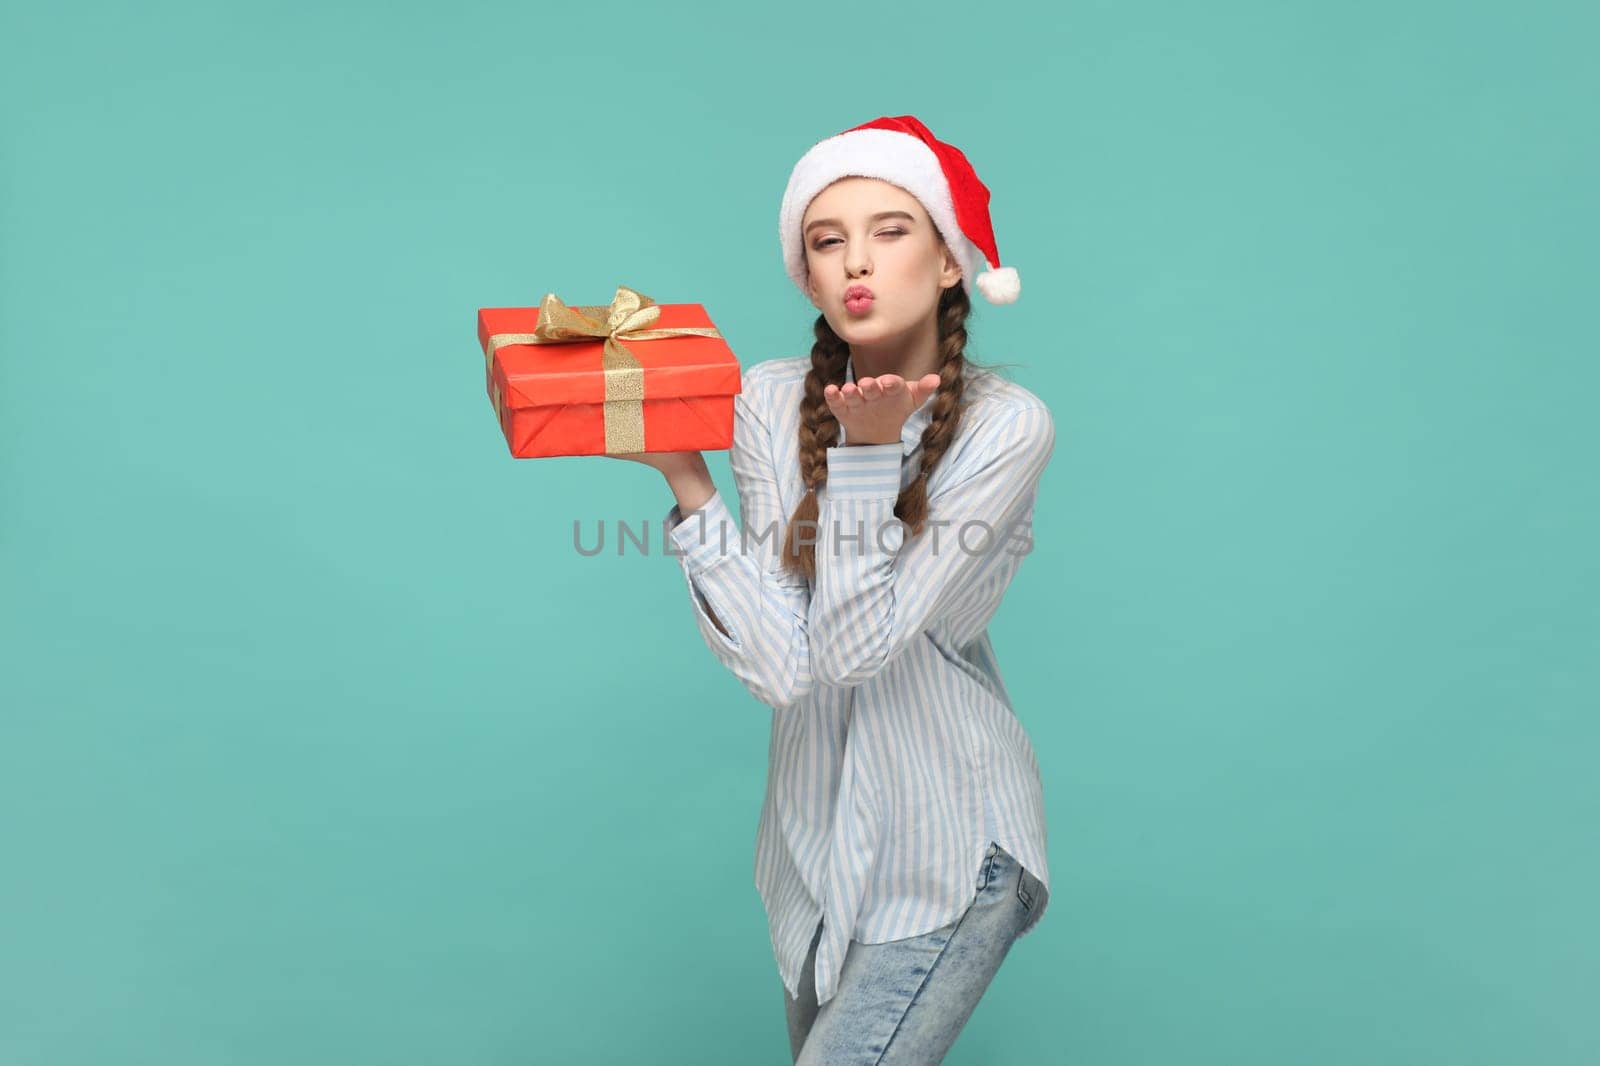 Portrait of charming cute romantic teenager girl with braids wearing striped shirt and Santa Claus hat, holding gift box, sending air kiss. Indoor studio shot isolated on green background.